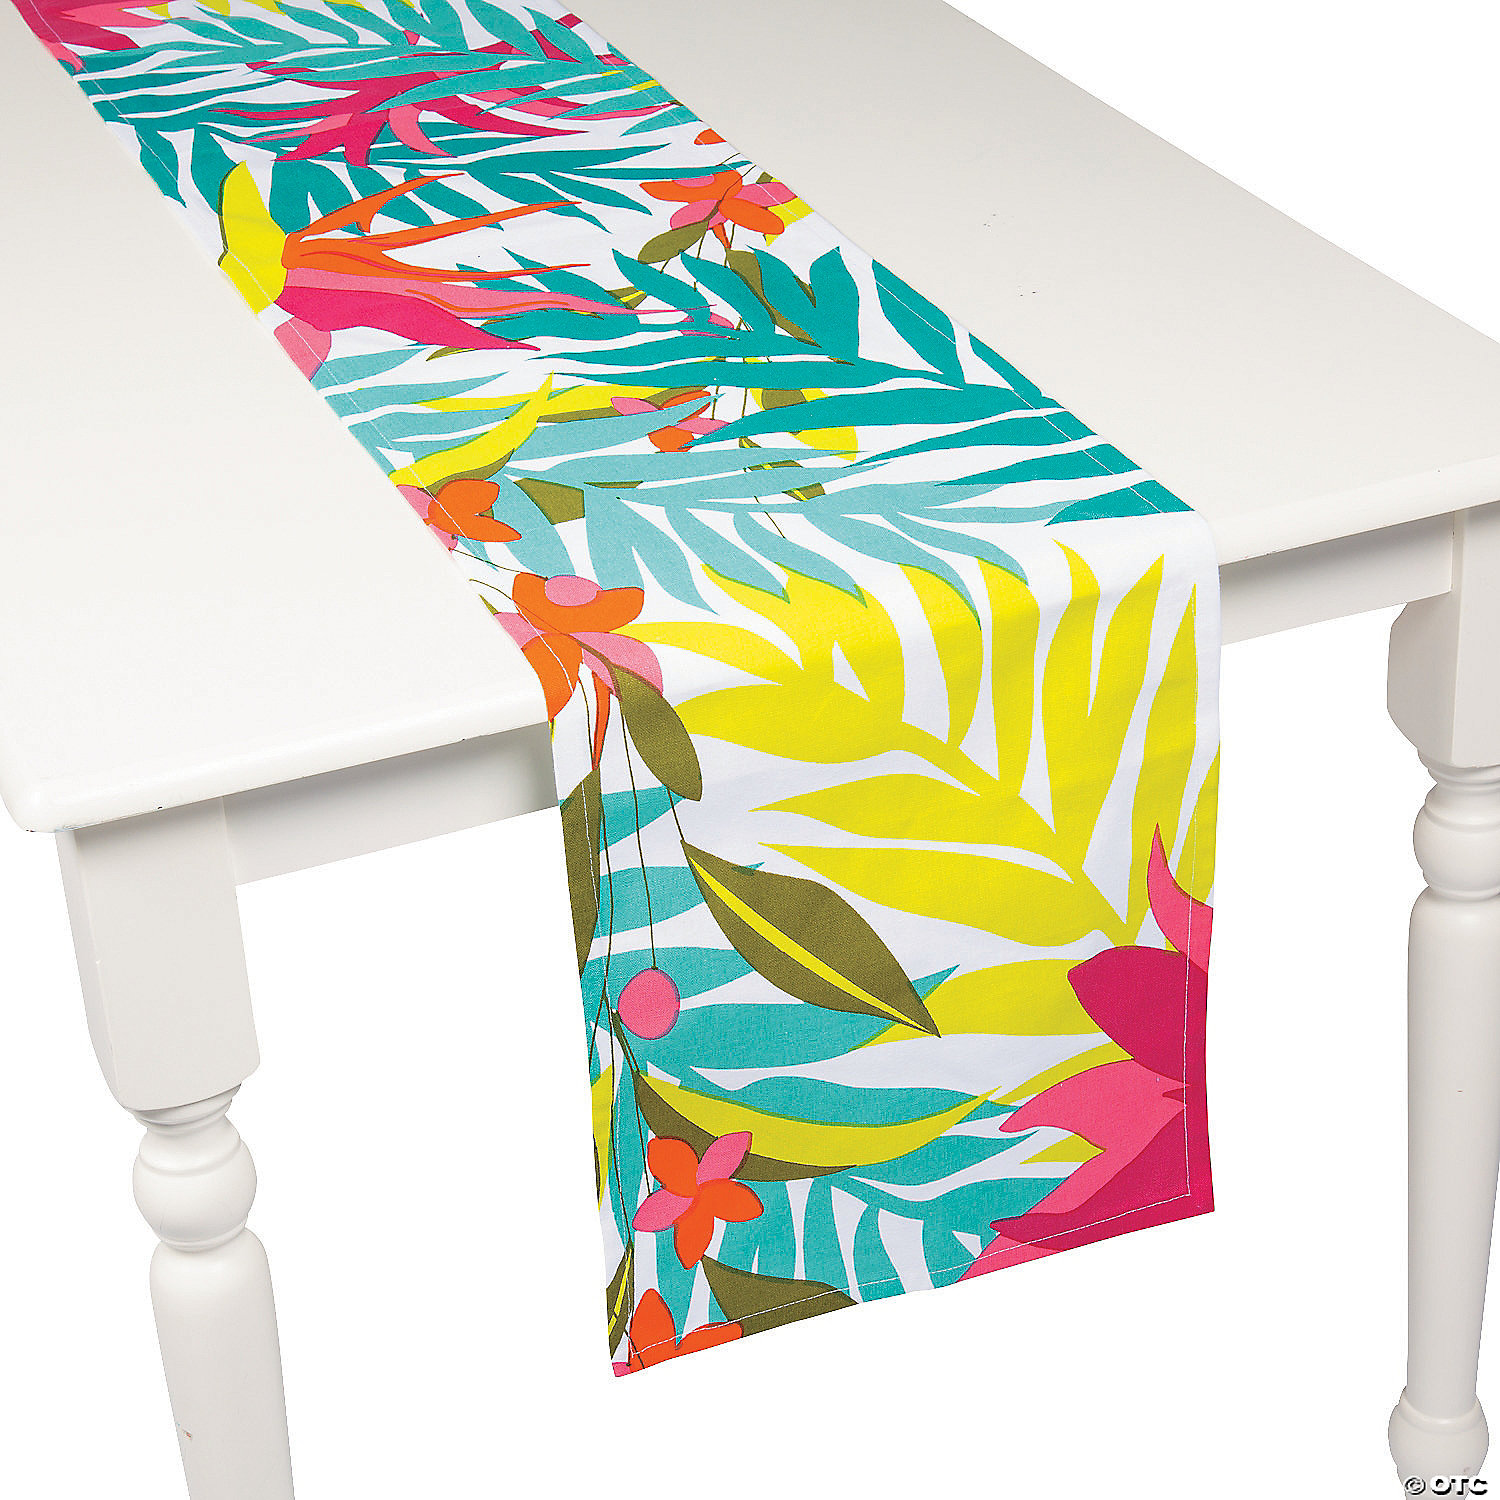 AUUXVA Double-Sided Table Runner Abstract Watercolor Tropical Plant Cactus Table Cloth Runners for Wedding Holiday Party Kitchen Dining Home Decor,13x90 Inches Long